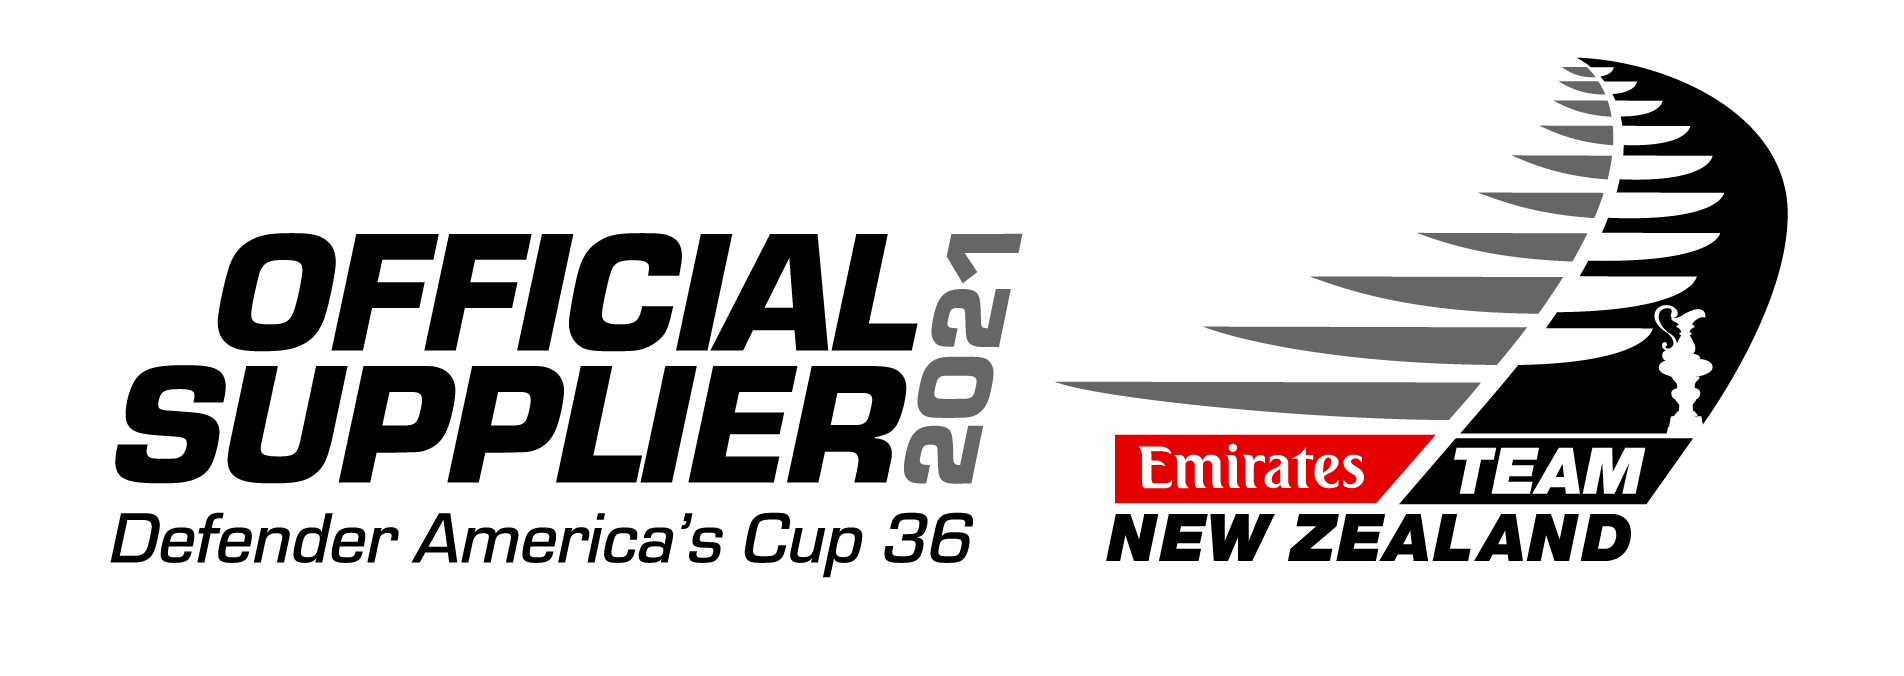 maxon motor is delighted to announce that it will be an Official Supplier to Emirates Team New Zealand for the 36th America&rsquo;s Cup Defence, including the America&rsquo;s Cup World Series events and Christmas Race